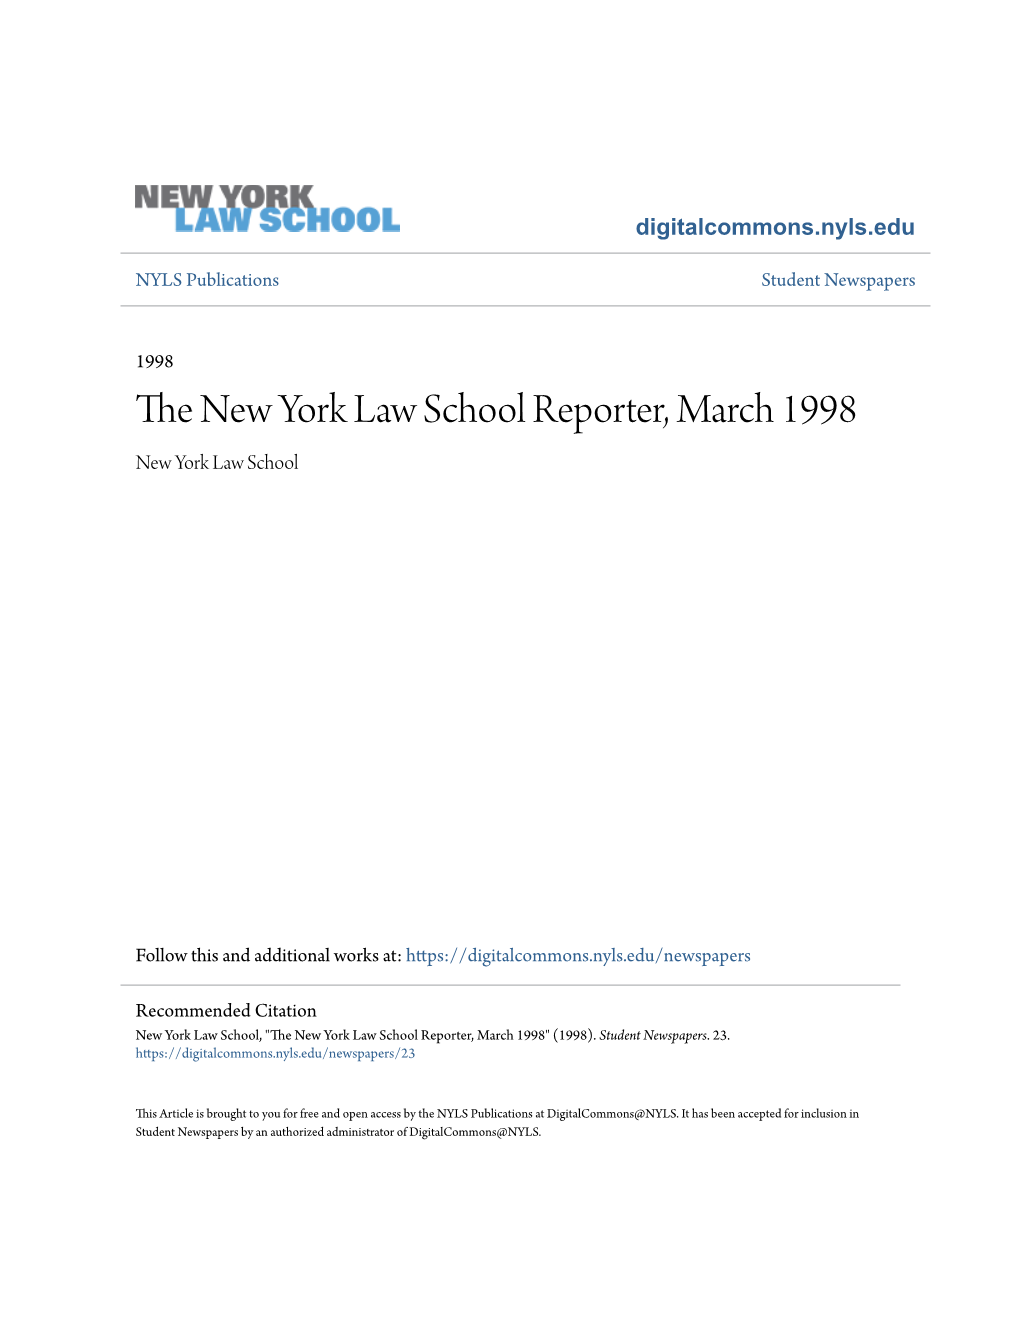 The New York Law School Reporter, March 1998